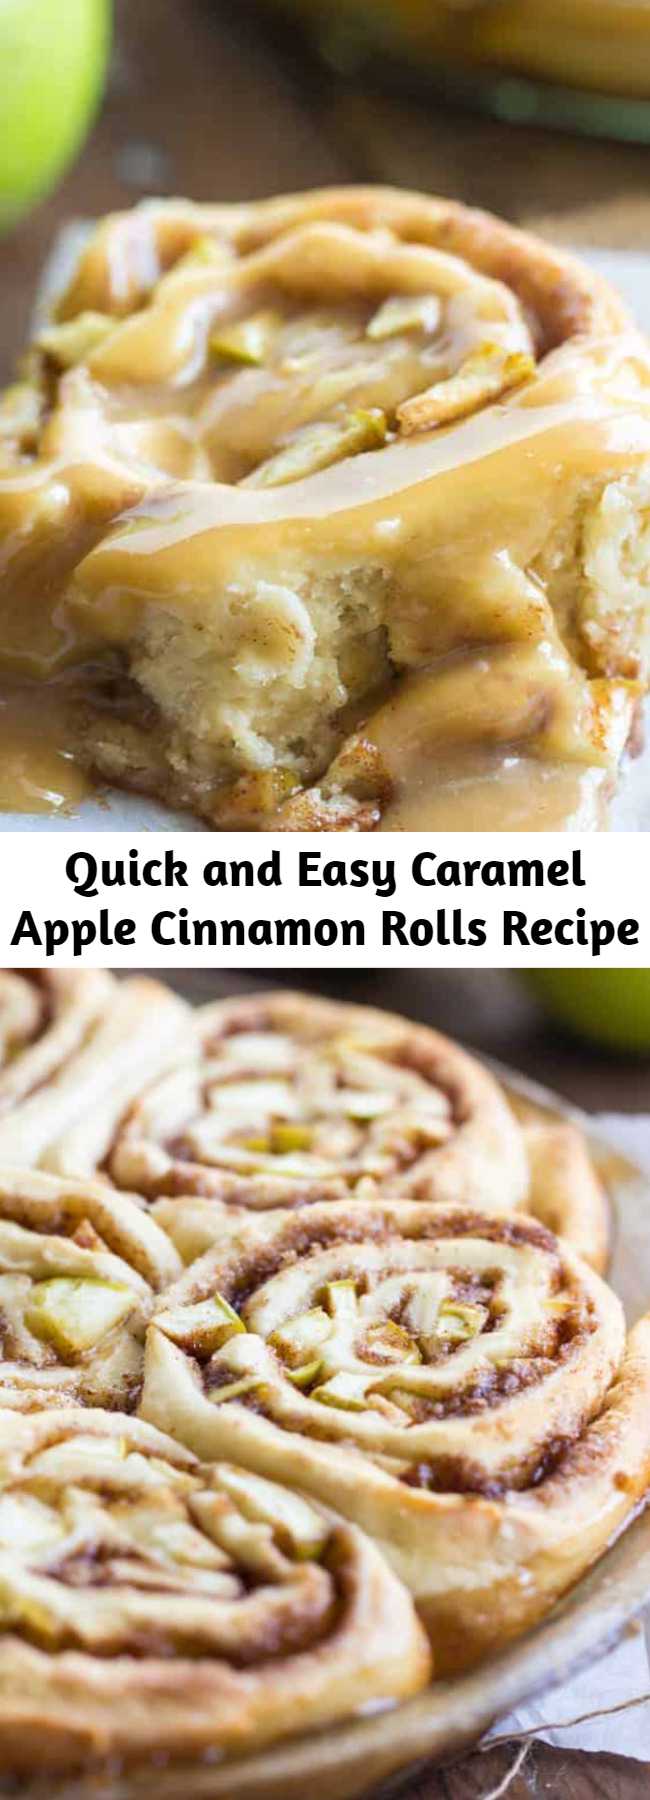 Quick and Easy Caramel Apple Cinnamon Rolls Recipe - Caramel Apple Cinnamon Rolls are a quick and easy cinnamon roll stuffed with real apples and drizzled with caramel. Ready within an hour!